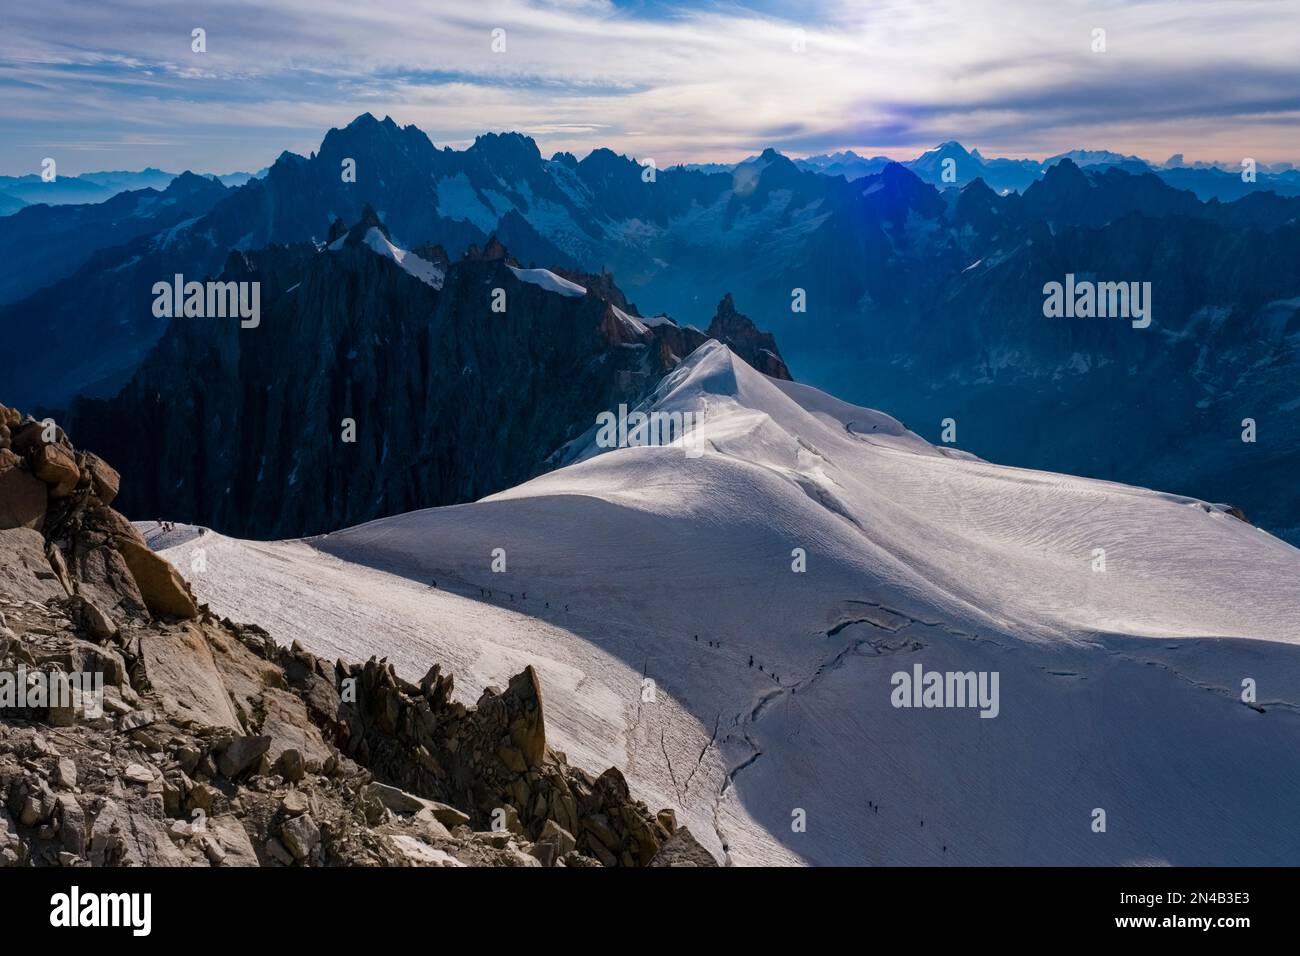 View of the upper part of the Géant Glacier and the eastern Mont Blanc massif, with Aiguille Verte standing out, alpinists crossing the ice. Stock Photo